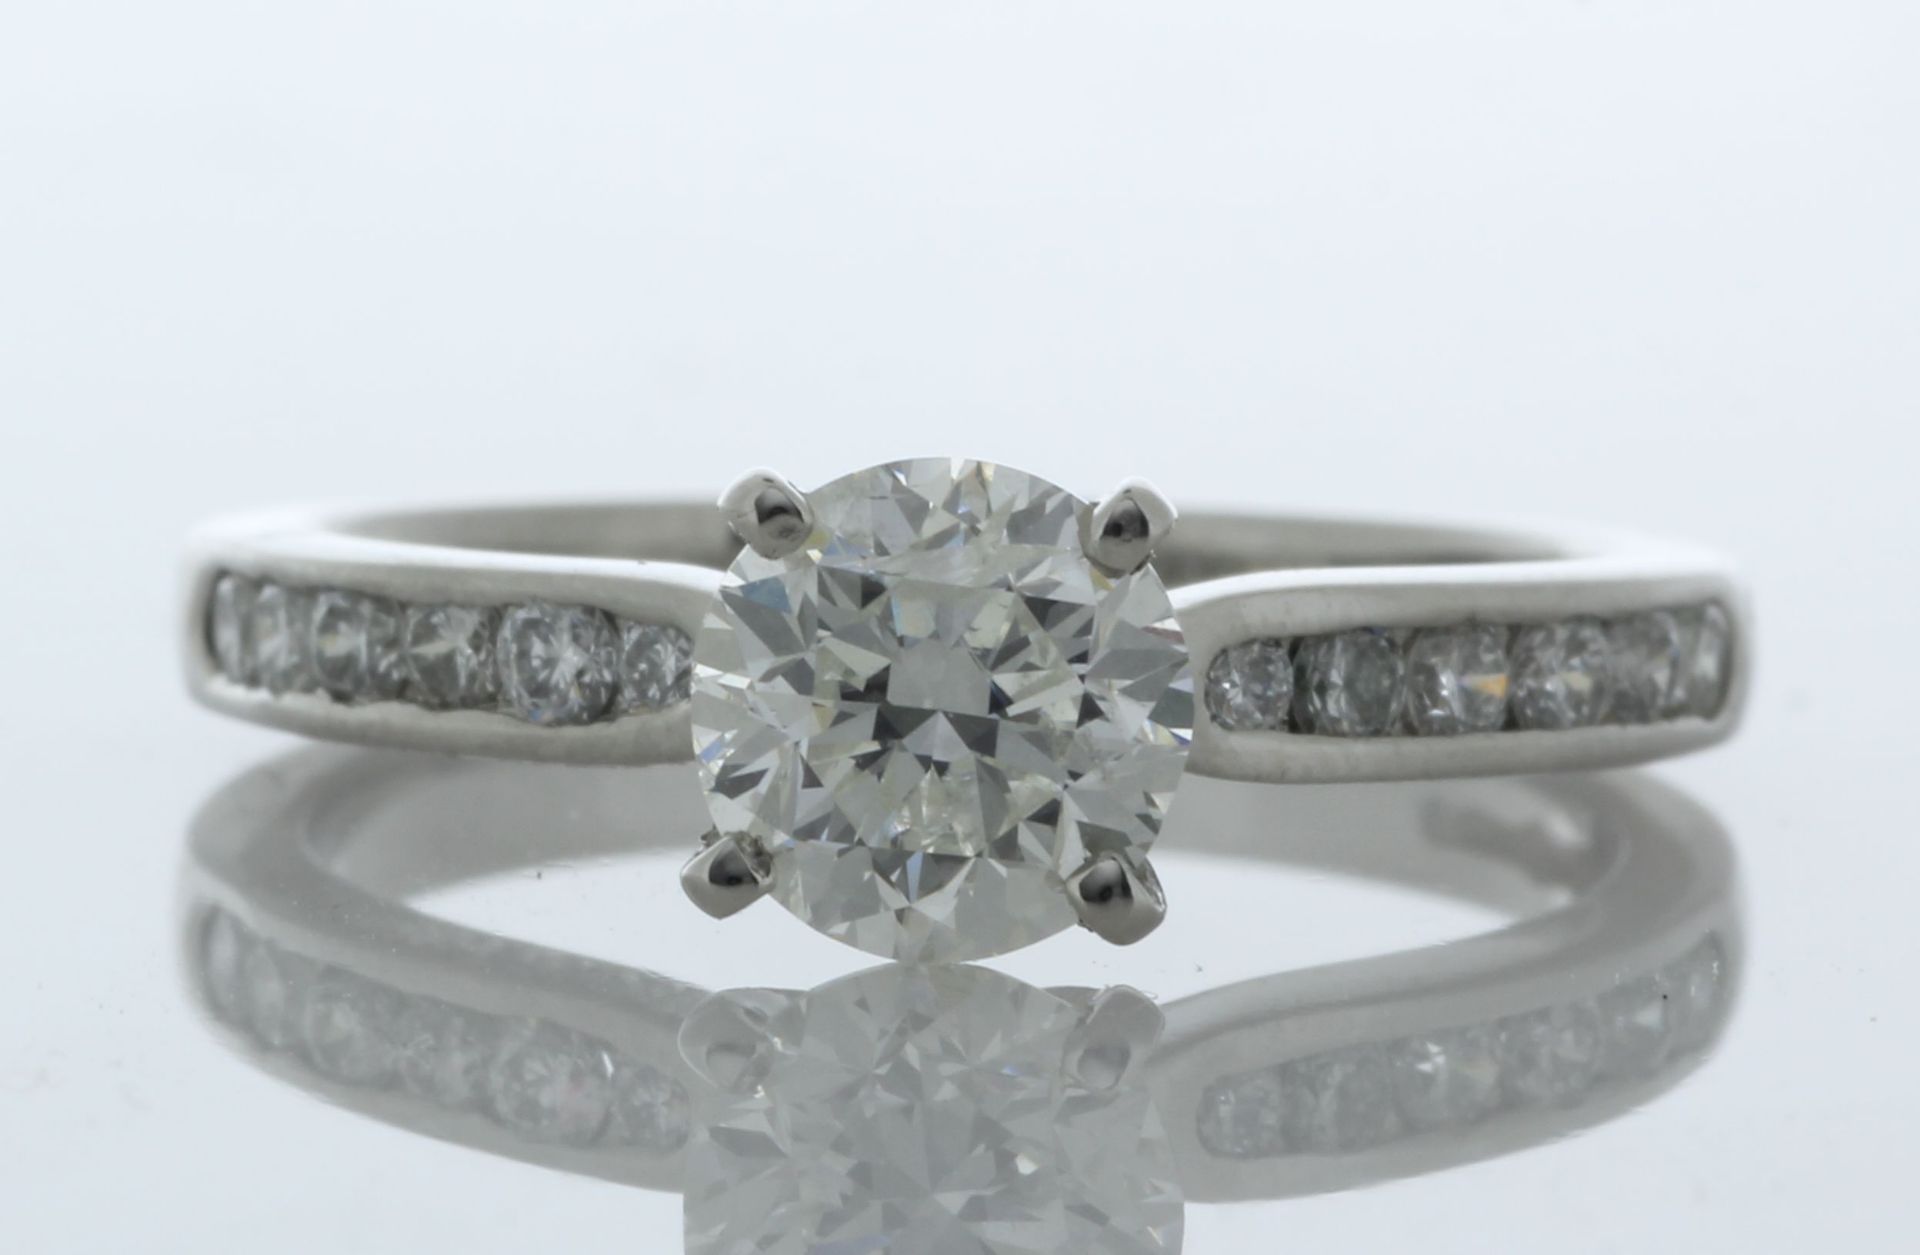 Platinum Single Stone Diamond Ring 2.00 Carats - Valued By GIE £137,755.00 - A stunning 2.00 carat